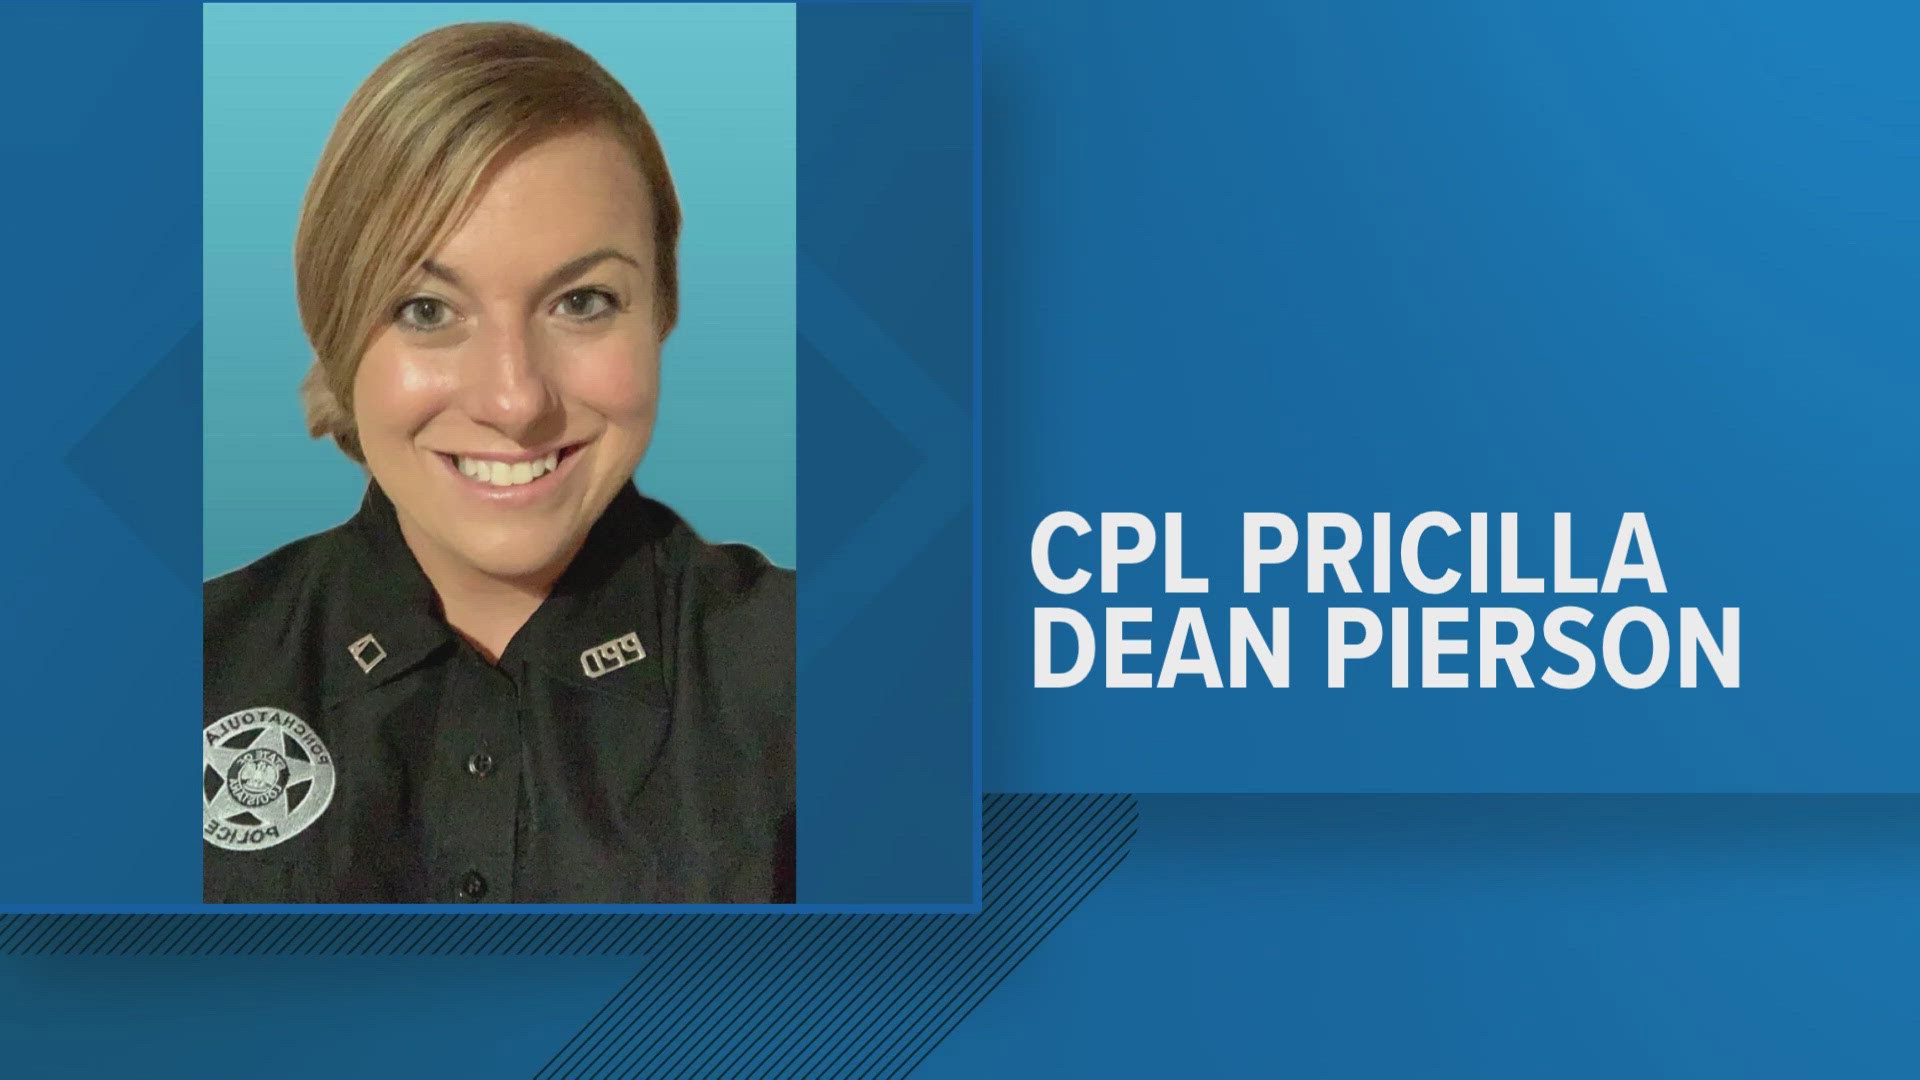 An autopsy found that Corporal Pricilla Pierson died from heart complications.